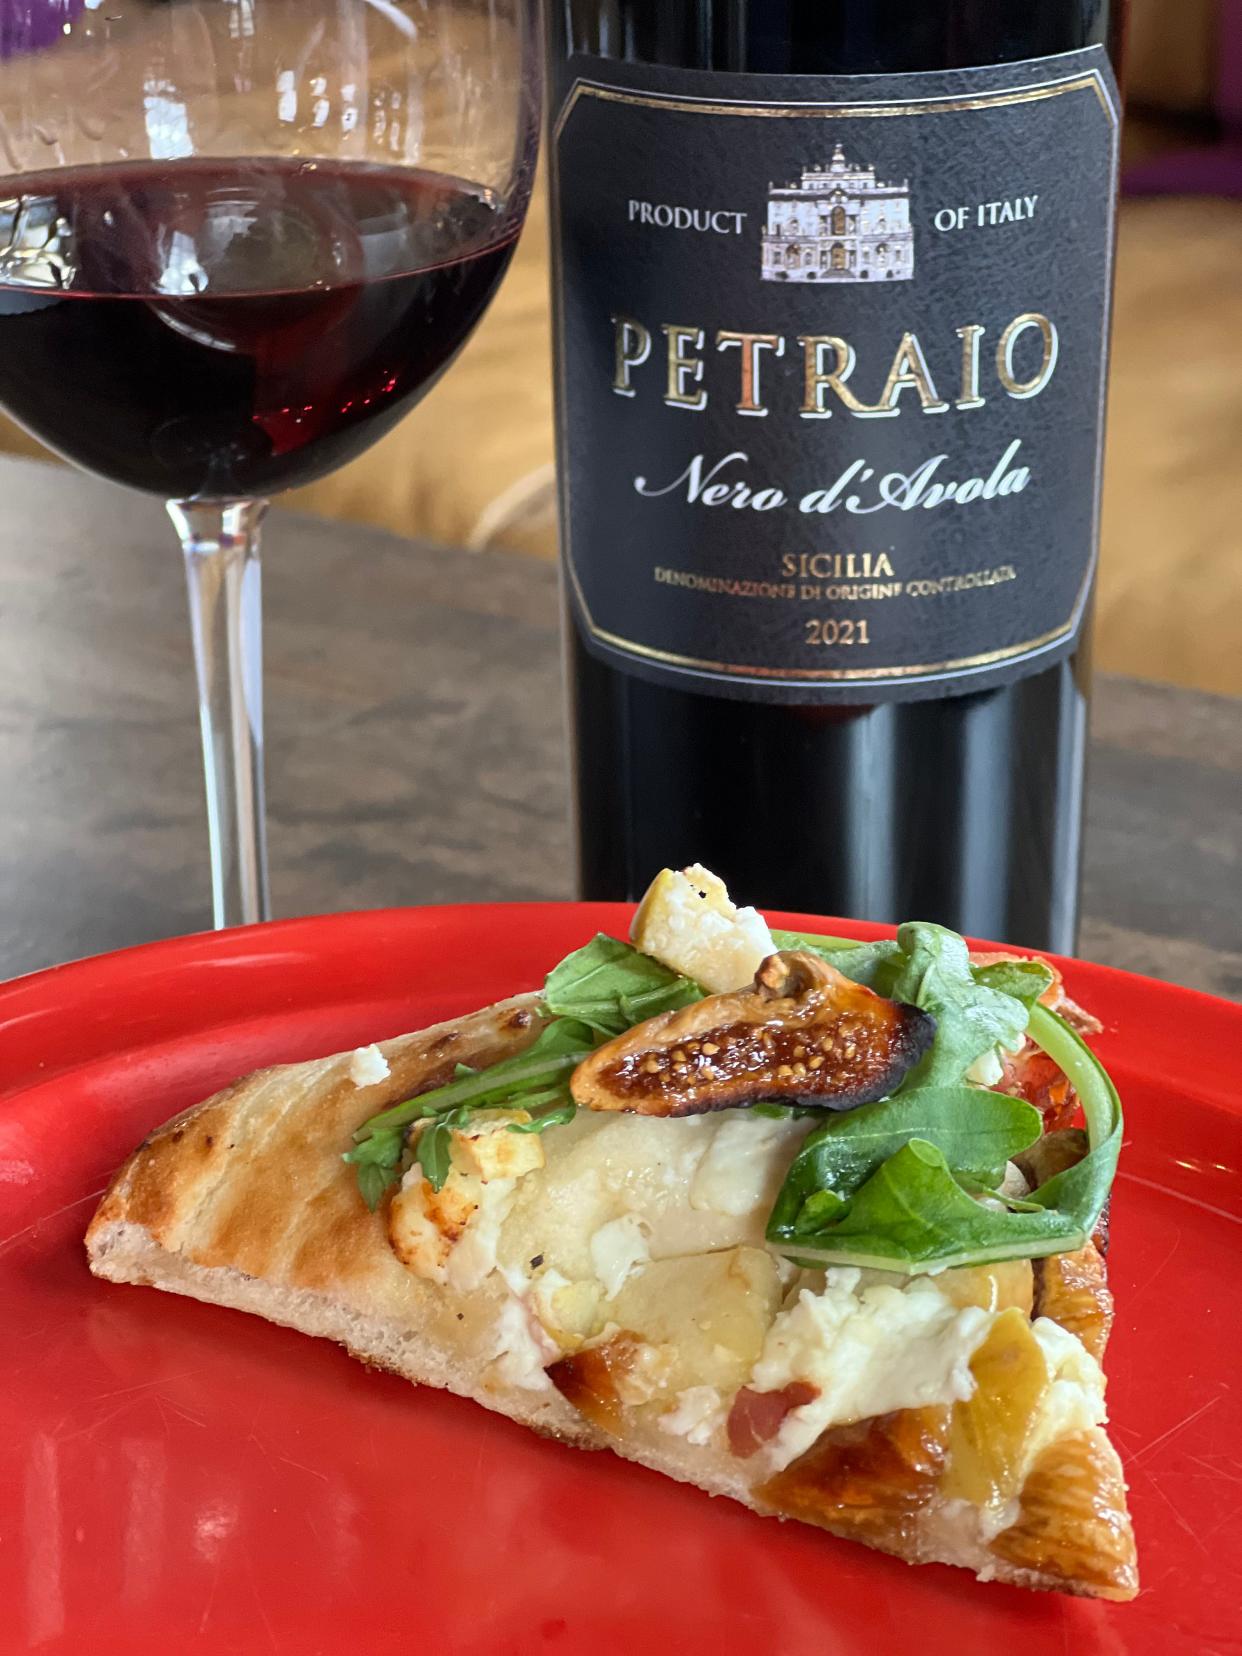 Cafe Arnone in Fairlawn offers, among other menu options, a fig and prosciutto pizza and Petraio Nero d'Avola wine from Sicily.